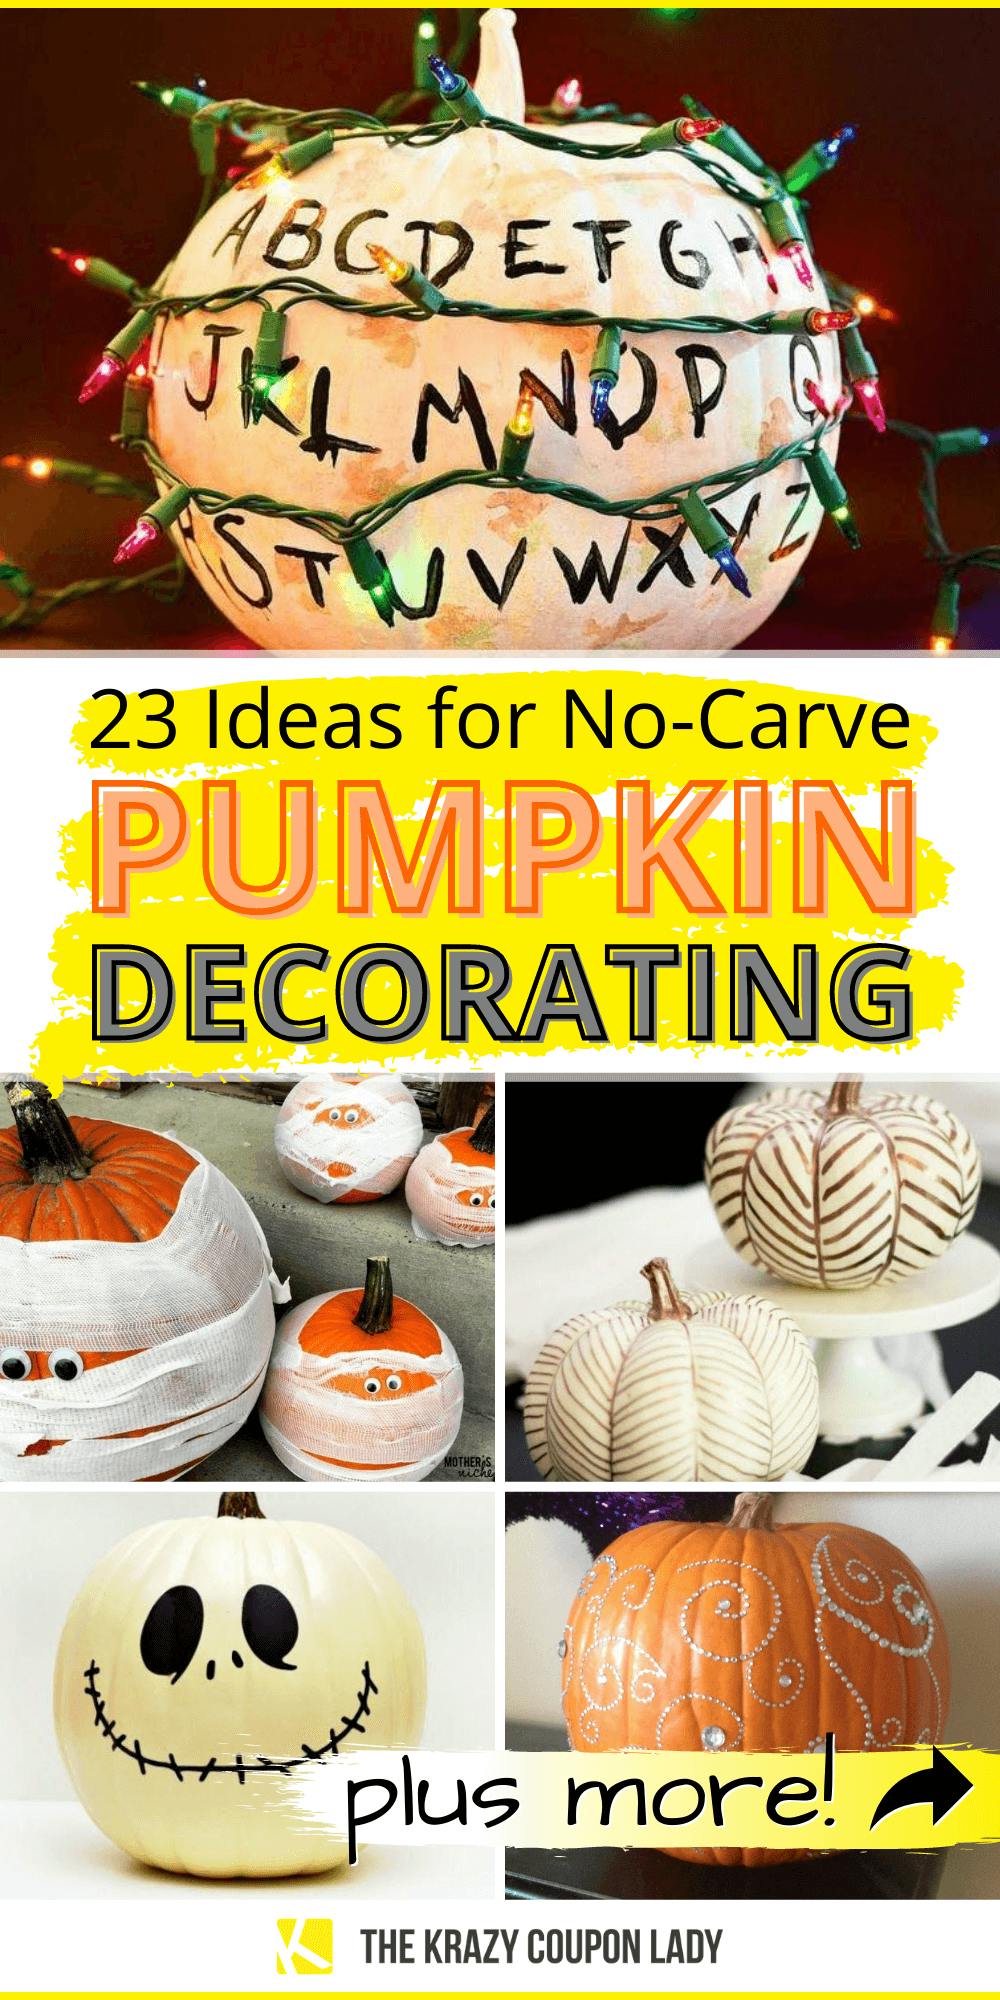 23 Pumpkin Decorating Ideas That Don't Involve Carving - The Krazy ...